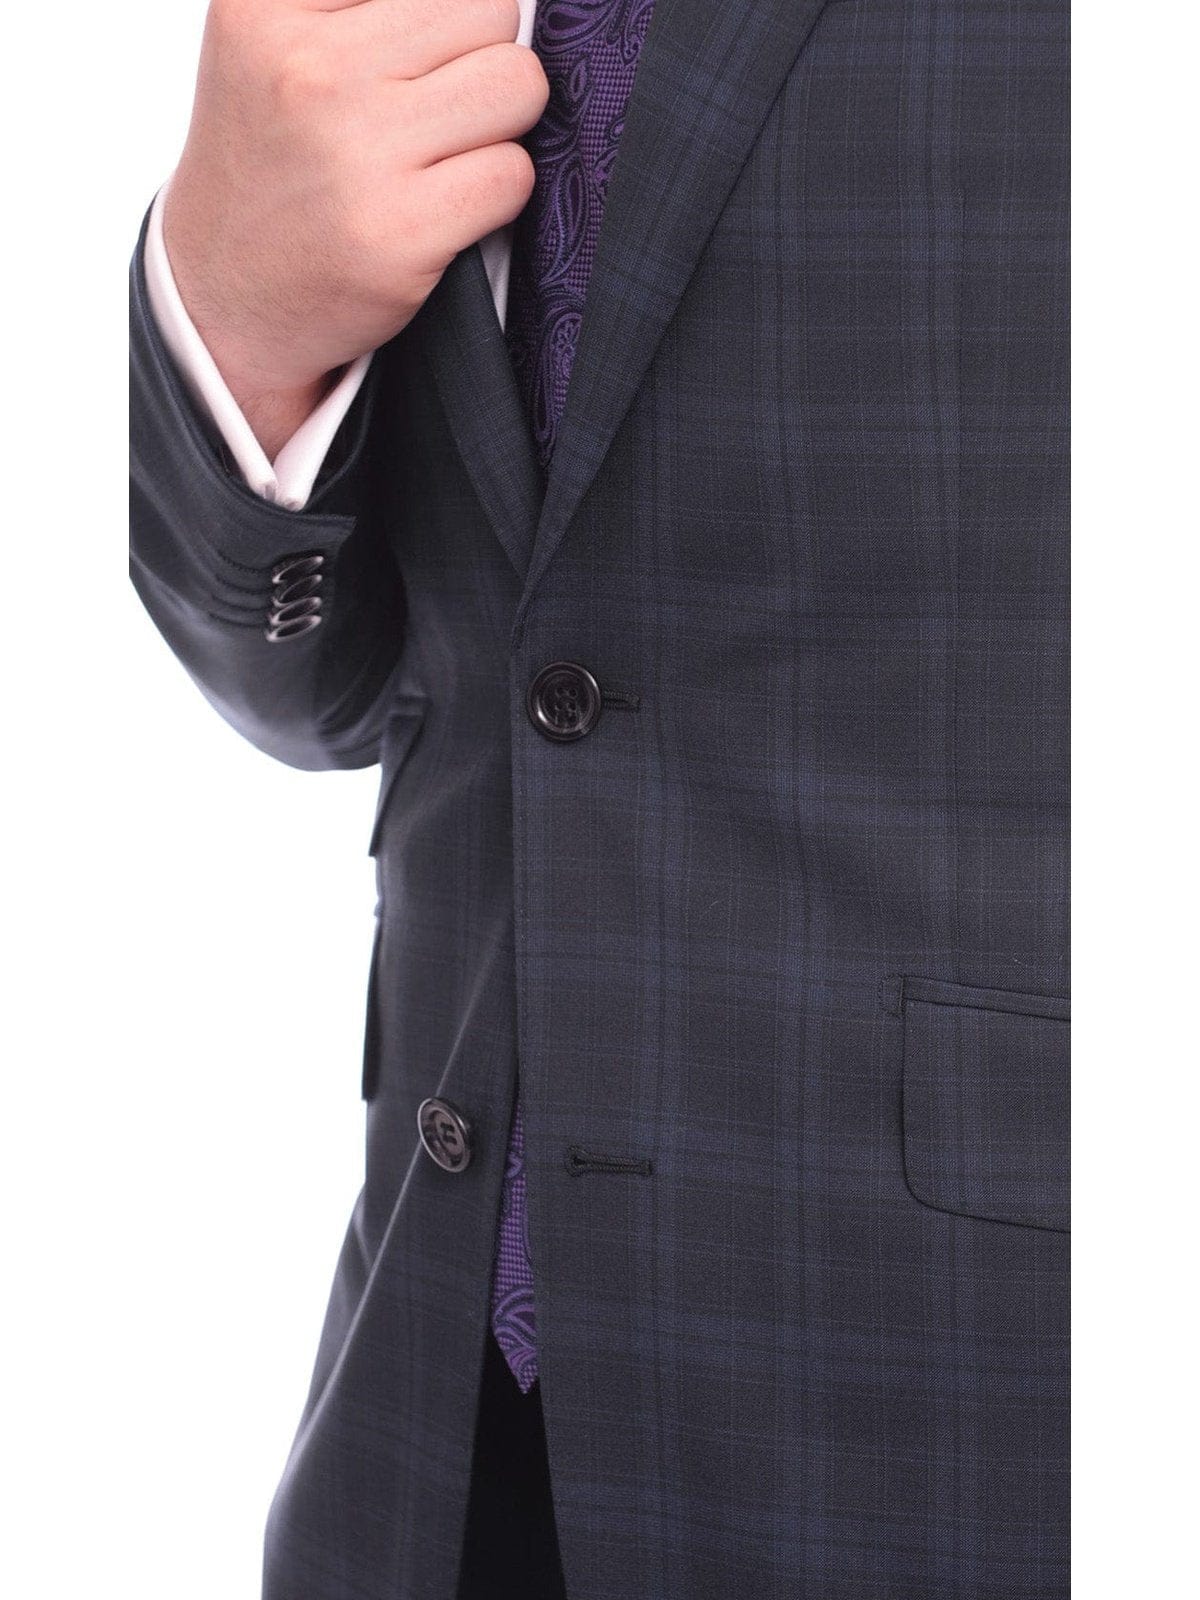 Napoli TWO PIECE SUITS Napoli Slim Fit Blue Plaid Half Canvassed Super 120s Guabello Wool Suit